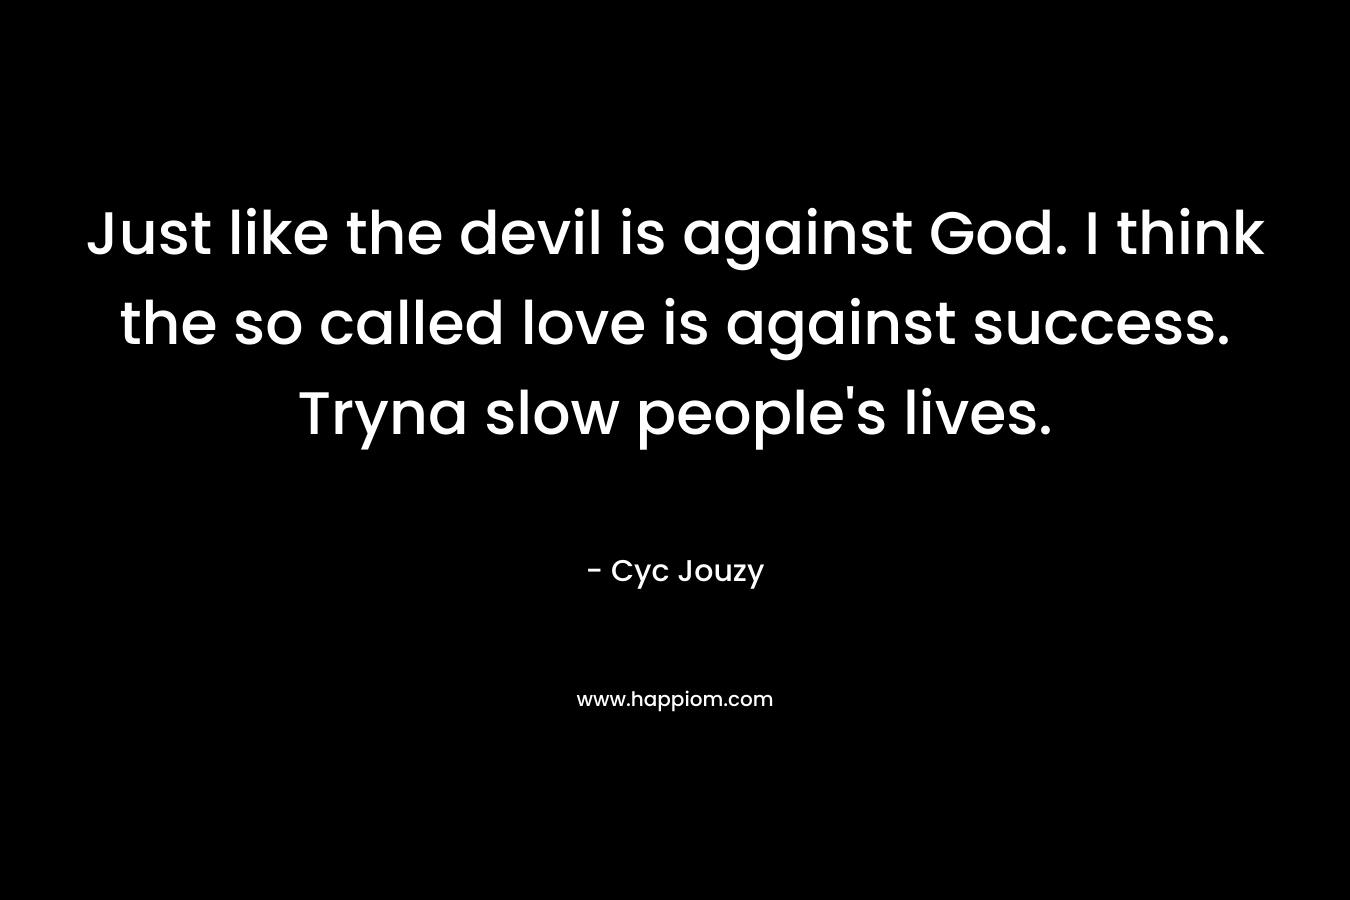 Just like the devil is against God. I think the so called love is against success. Tryna slow people's lives.